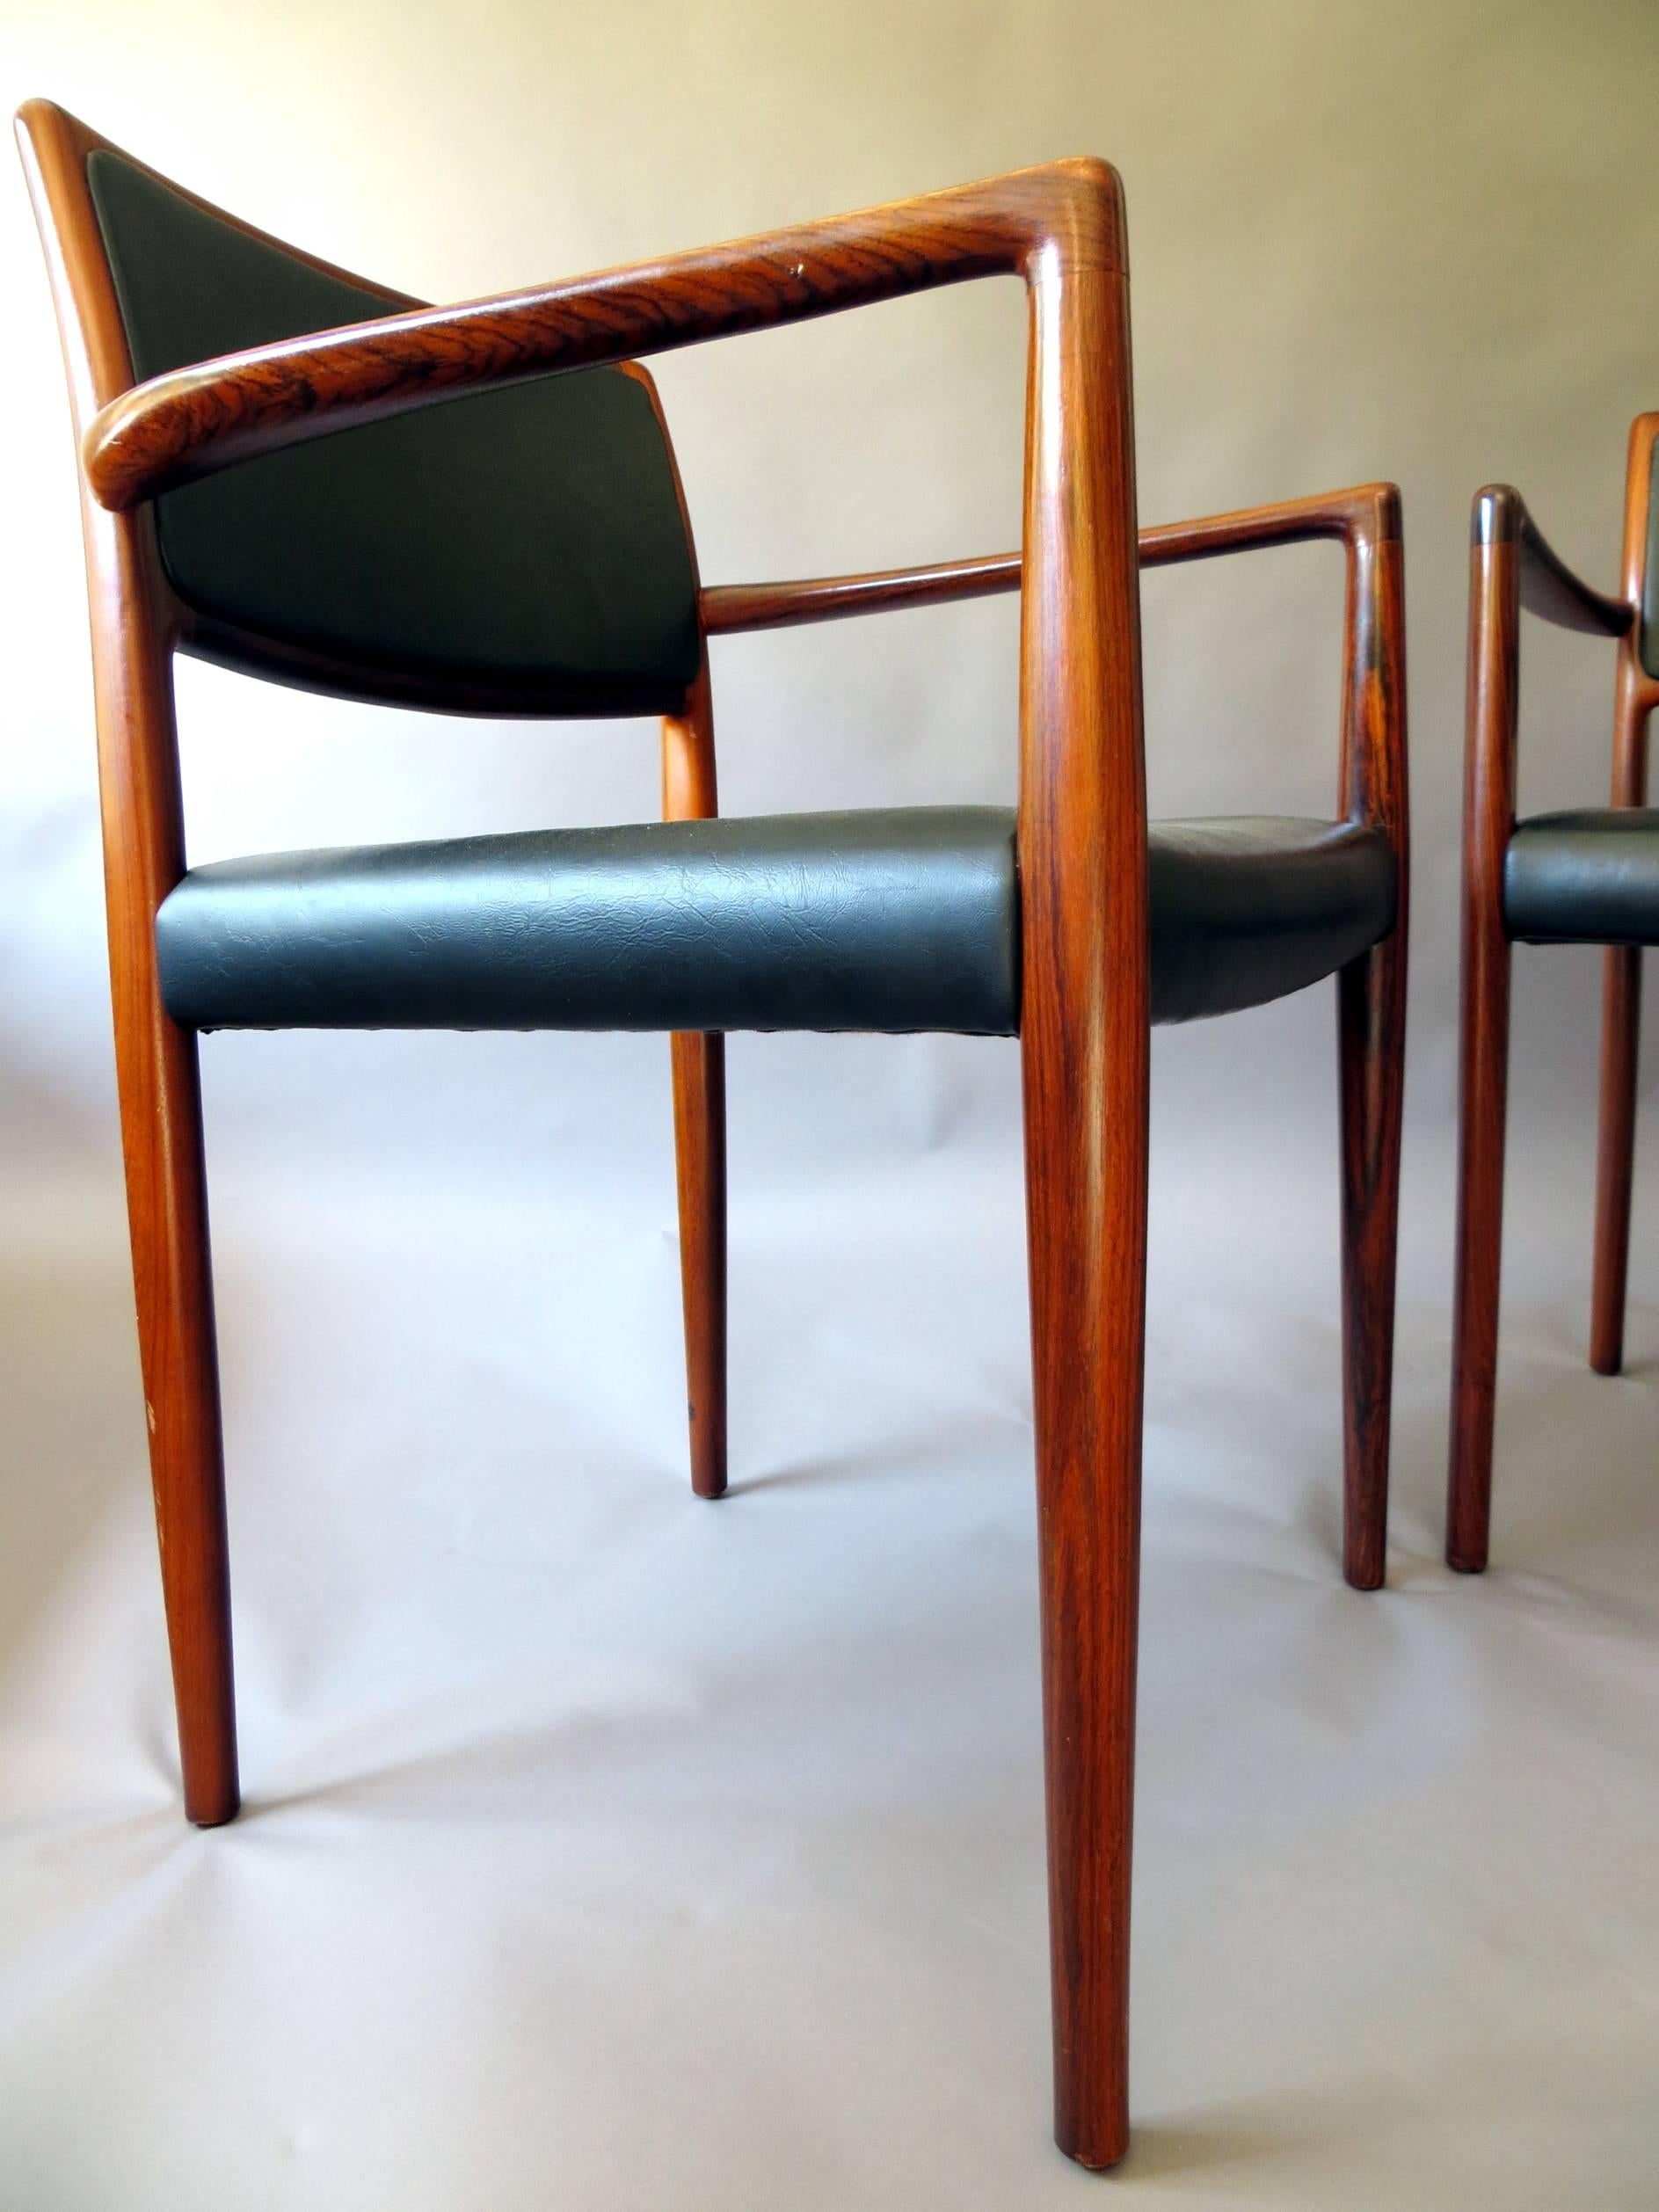 Danish Mid-Century Modern Rosewood and Leather Dining Chairs, Set of Two, 1960s For Sale 6